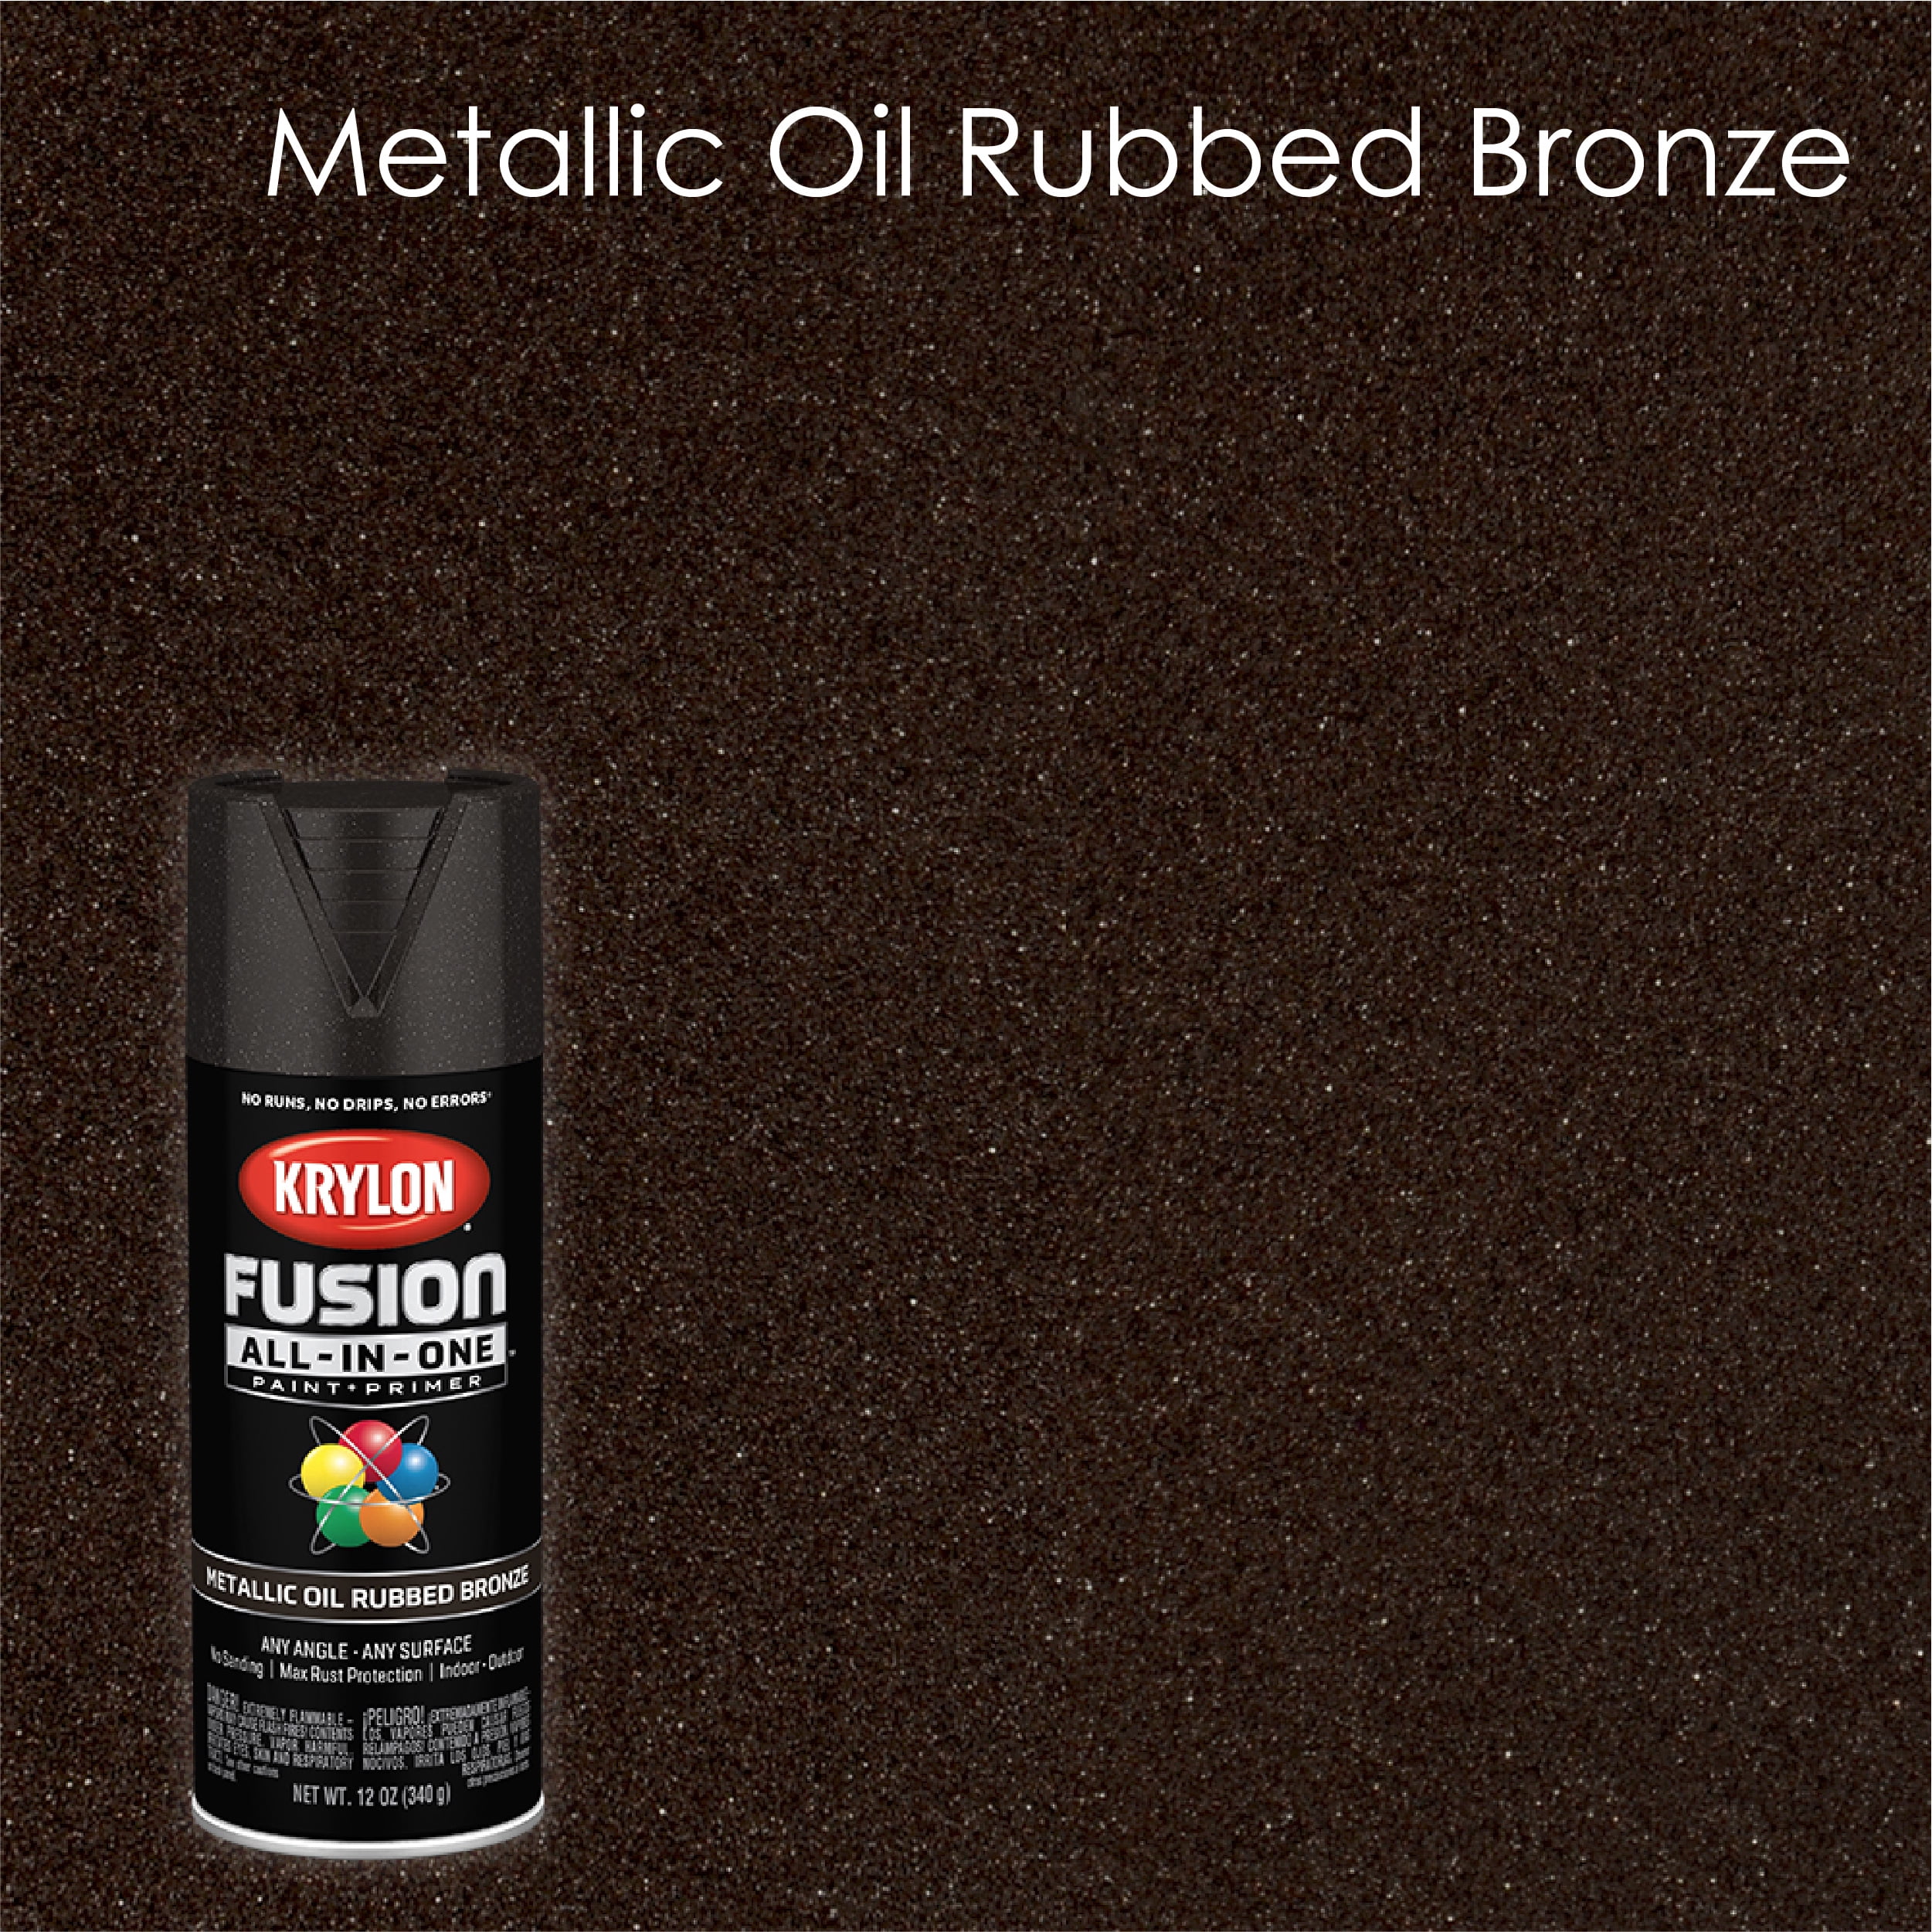 Krylon Fusion All-In-One Spray Paint, Metallic Oil Rubbed Bronze, 12 oz Paint Sprayer With Oil Based Paint